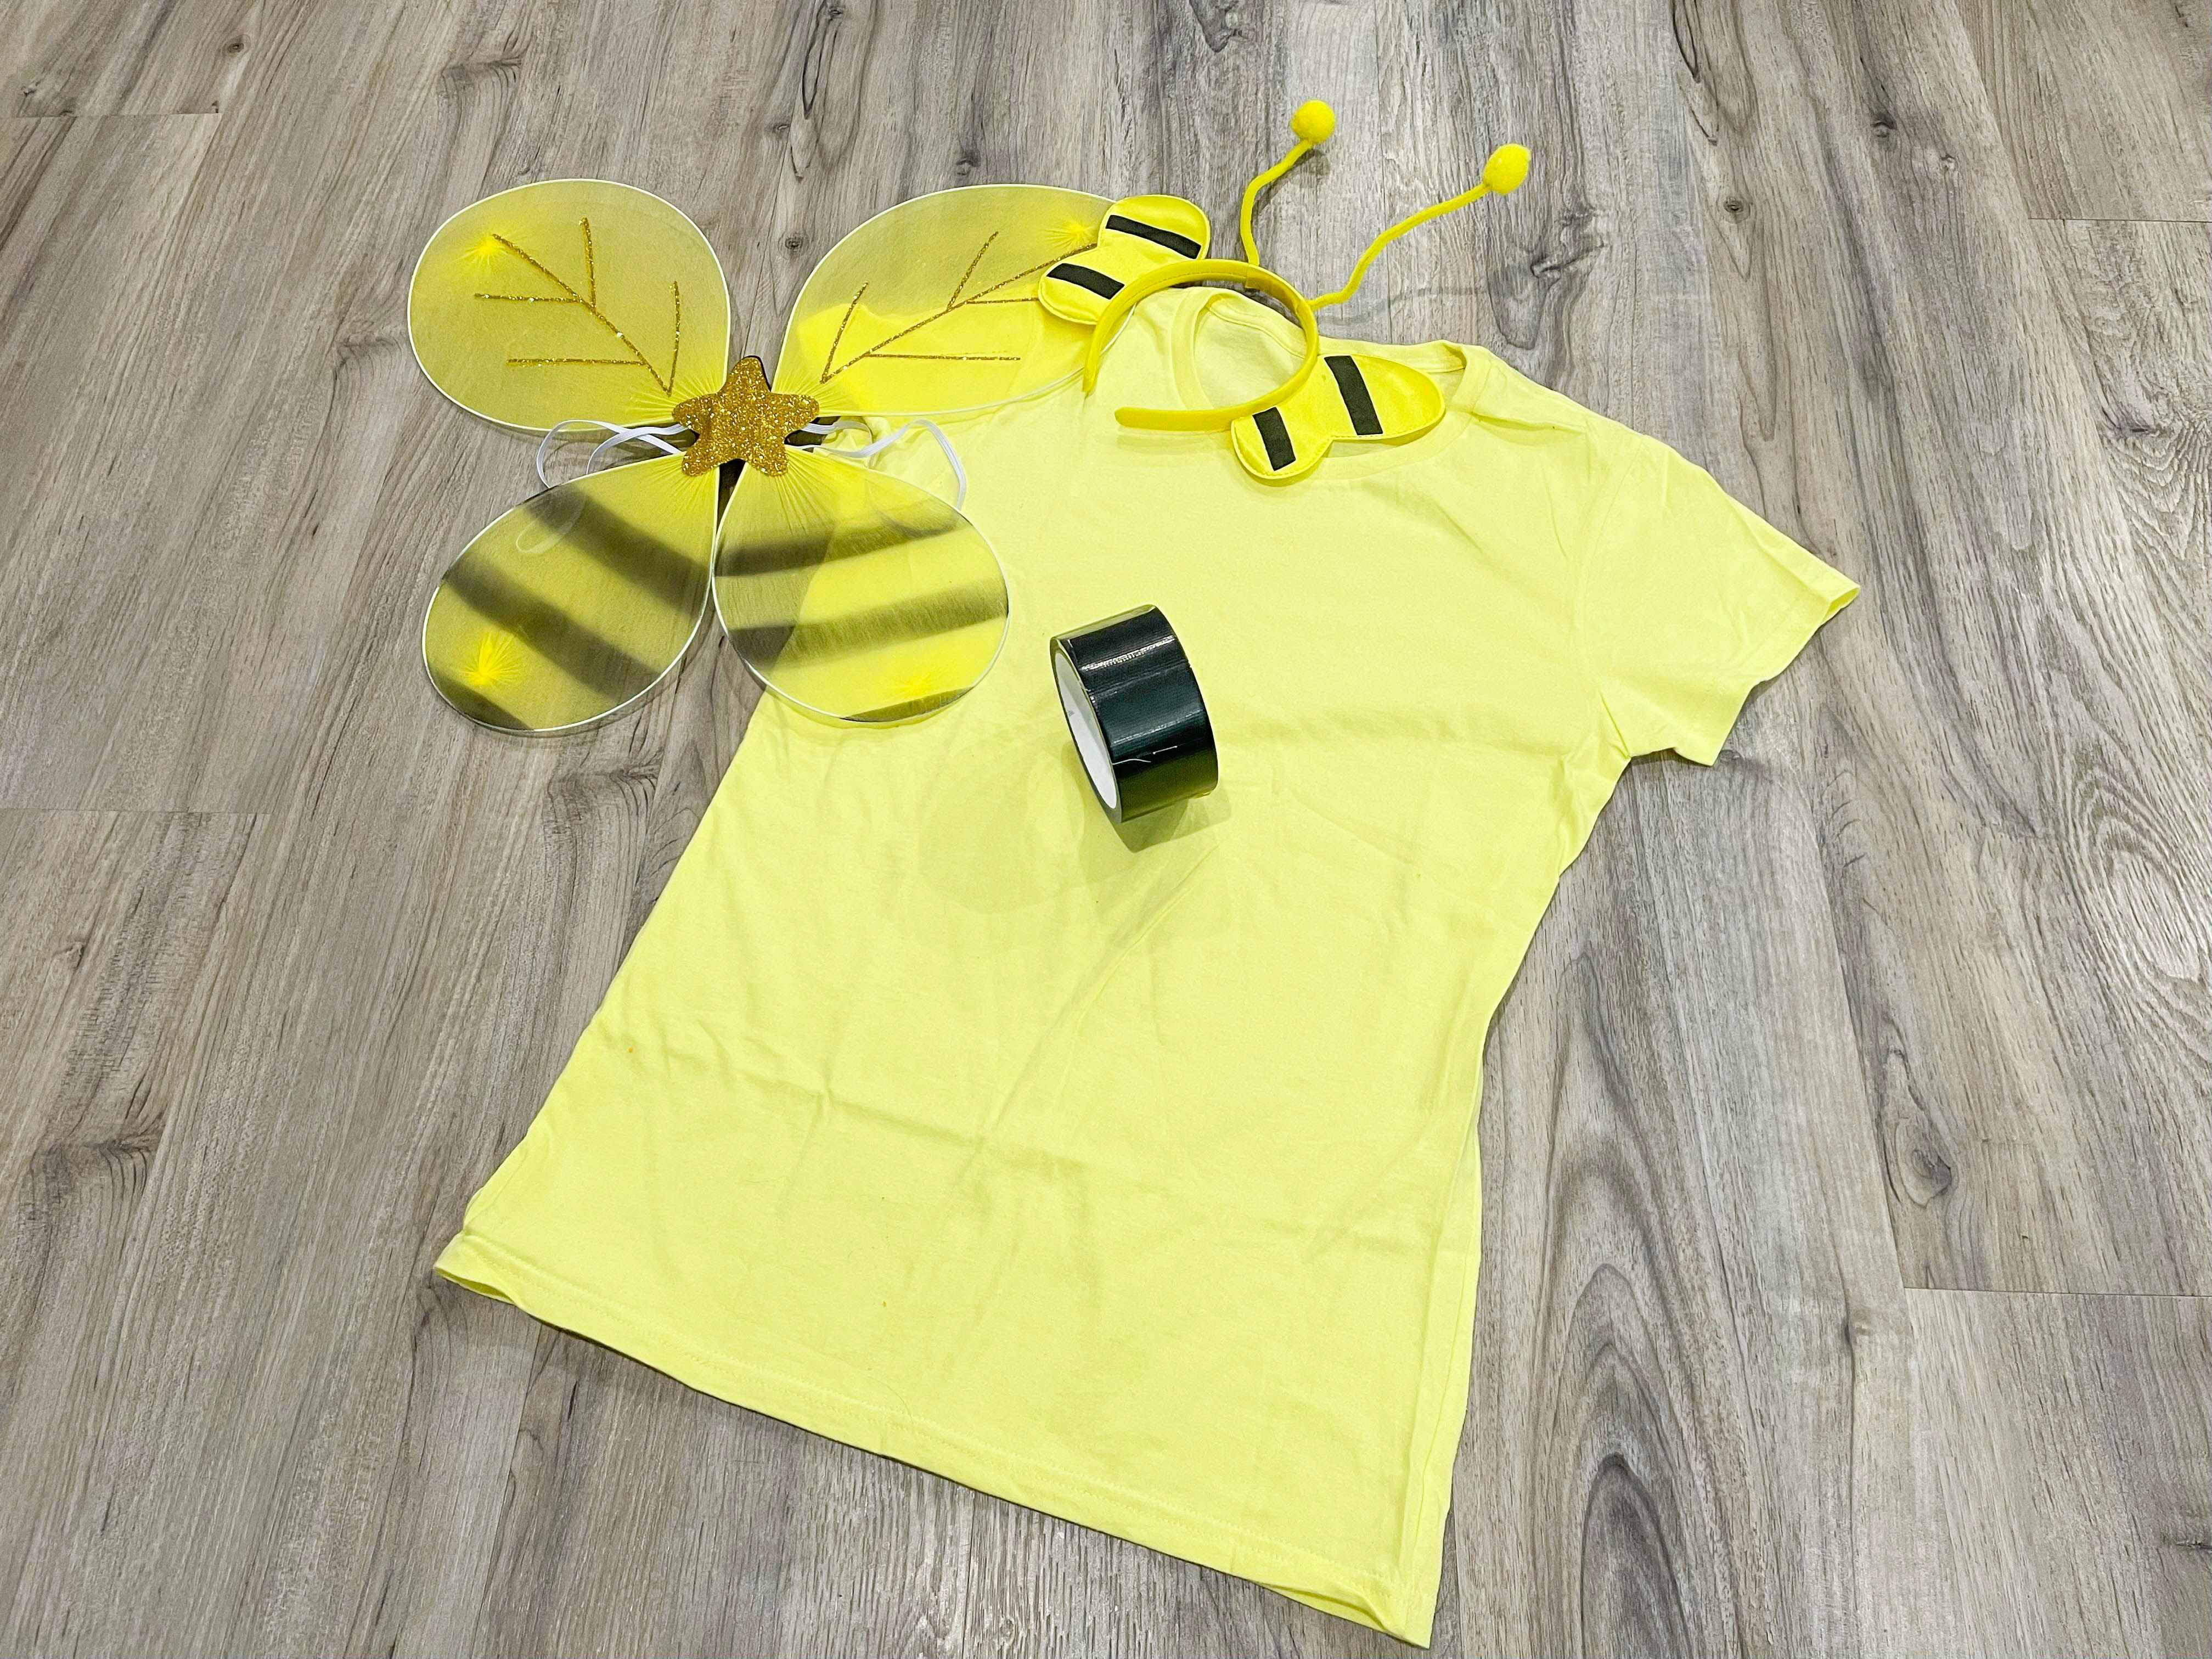 yellow shirt and bee costume items 